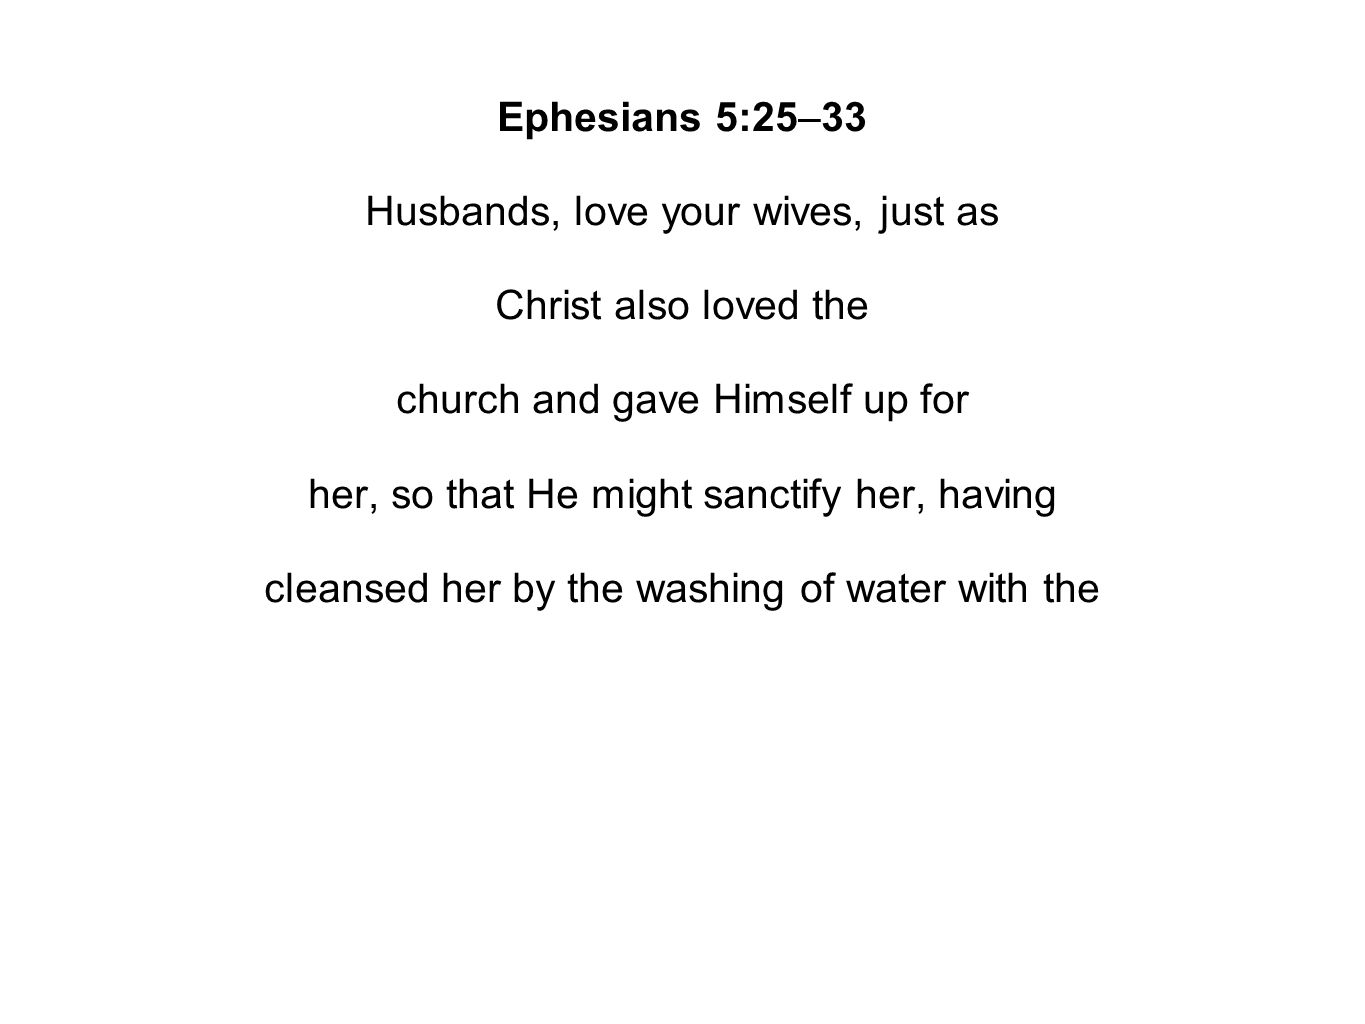 Ephesians 5:25–33 Husbands, love your wives, just as Christ also loved the church and gave Himself up for her, so that He might sanctify her, having cleansed her by the washing of water with the